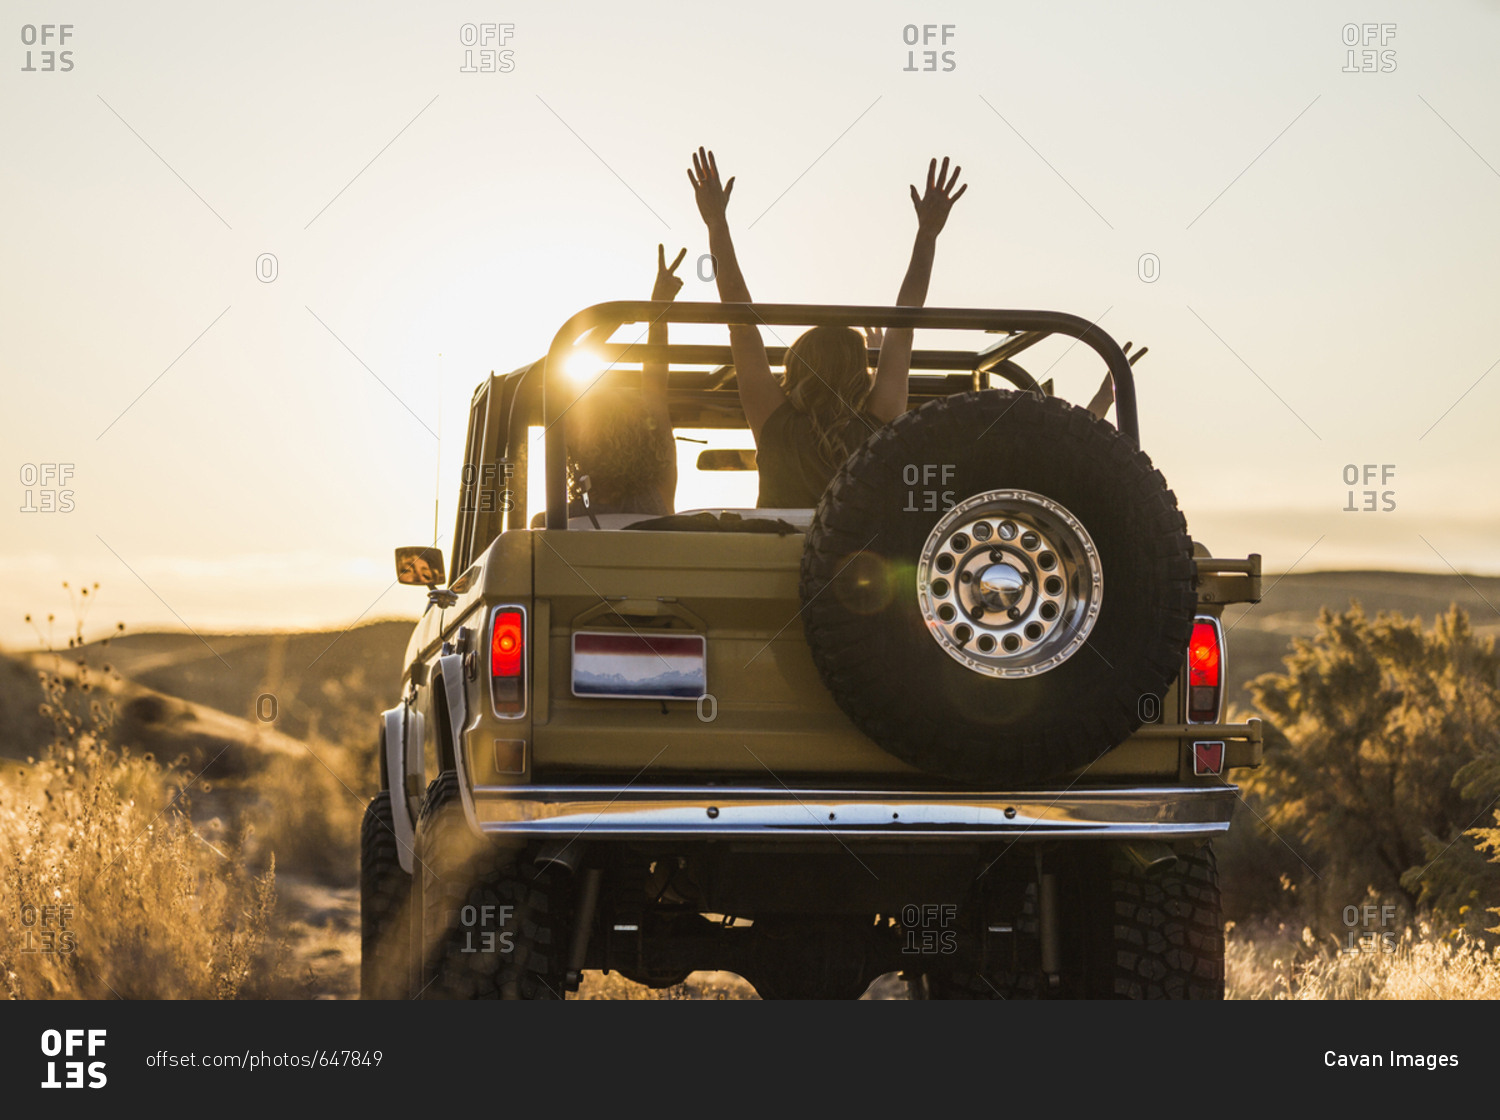 Rear view of female friends gesturing while traveling in off-road vehicle against sky